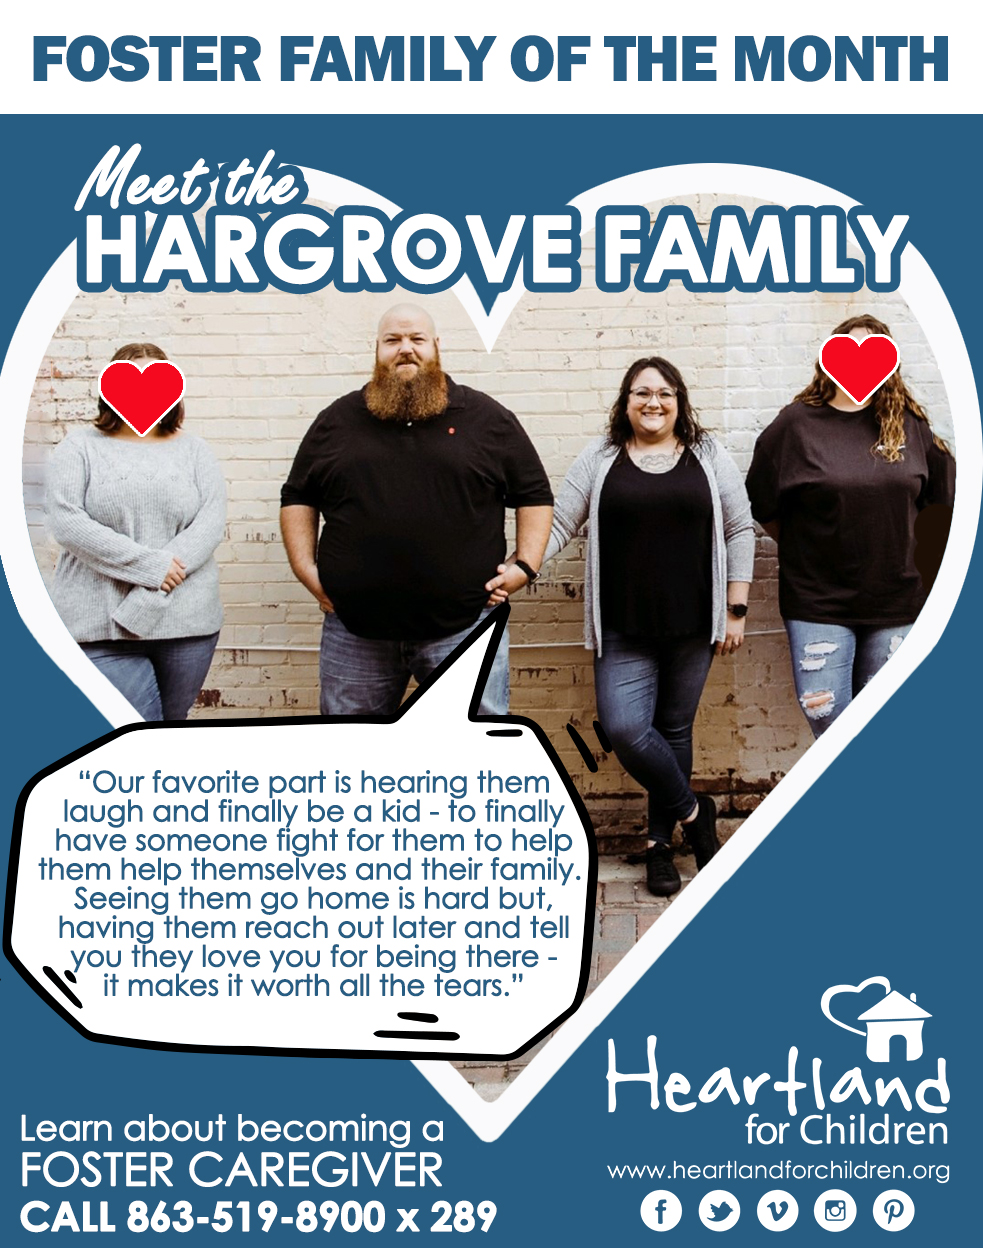 Foster Family of the Month: Hargrove